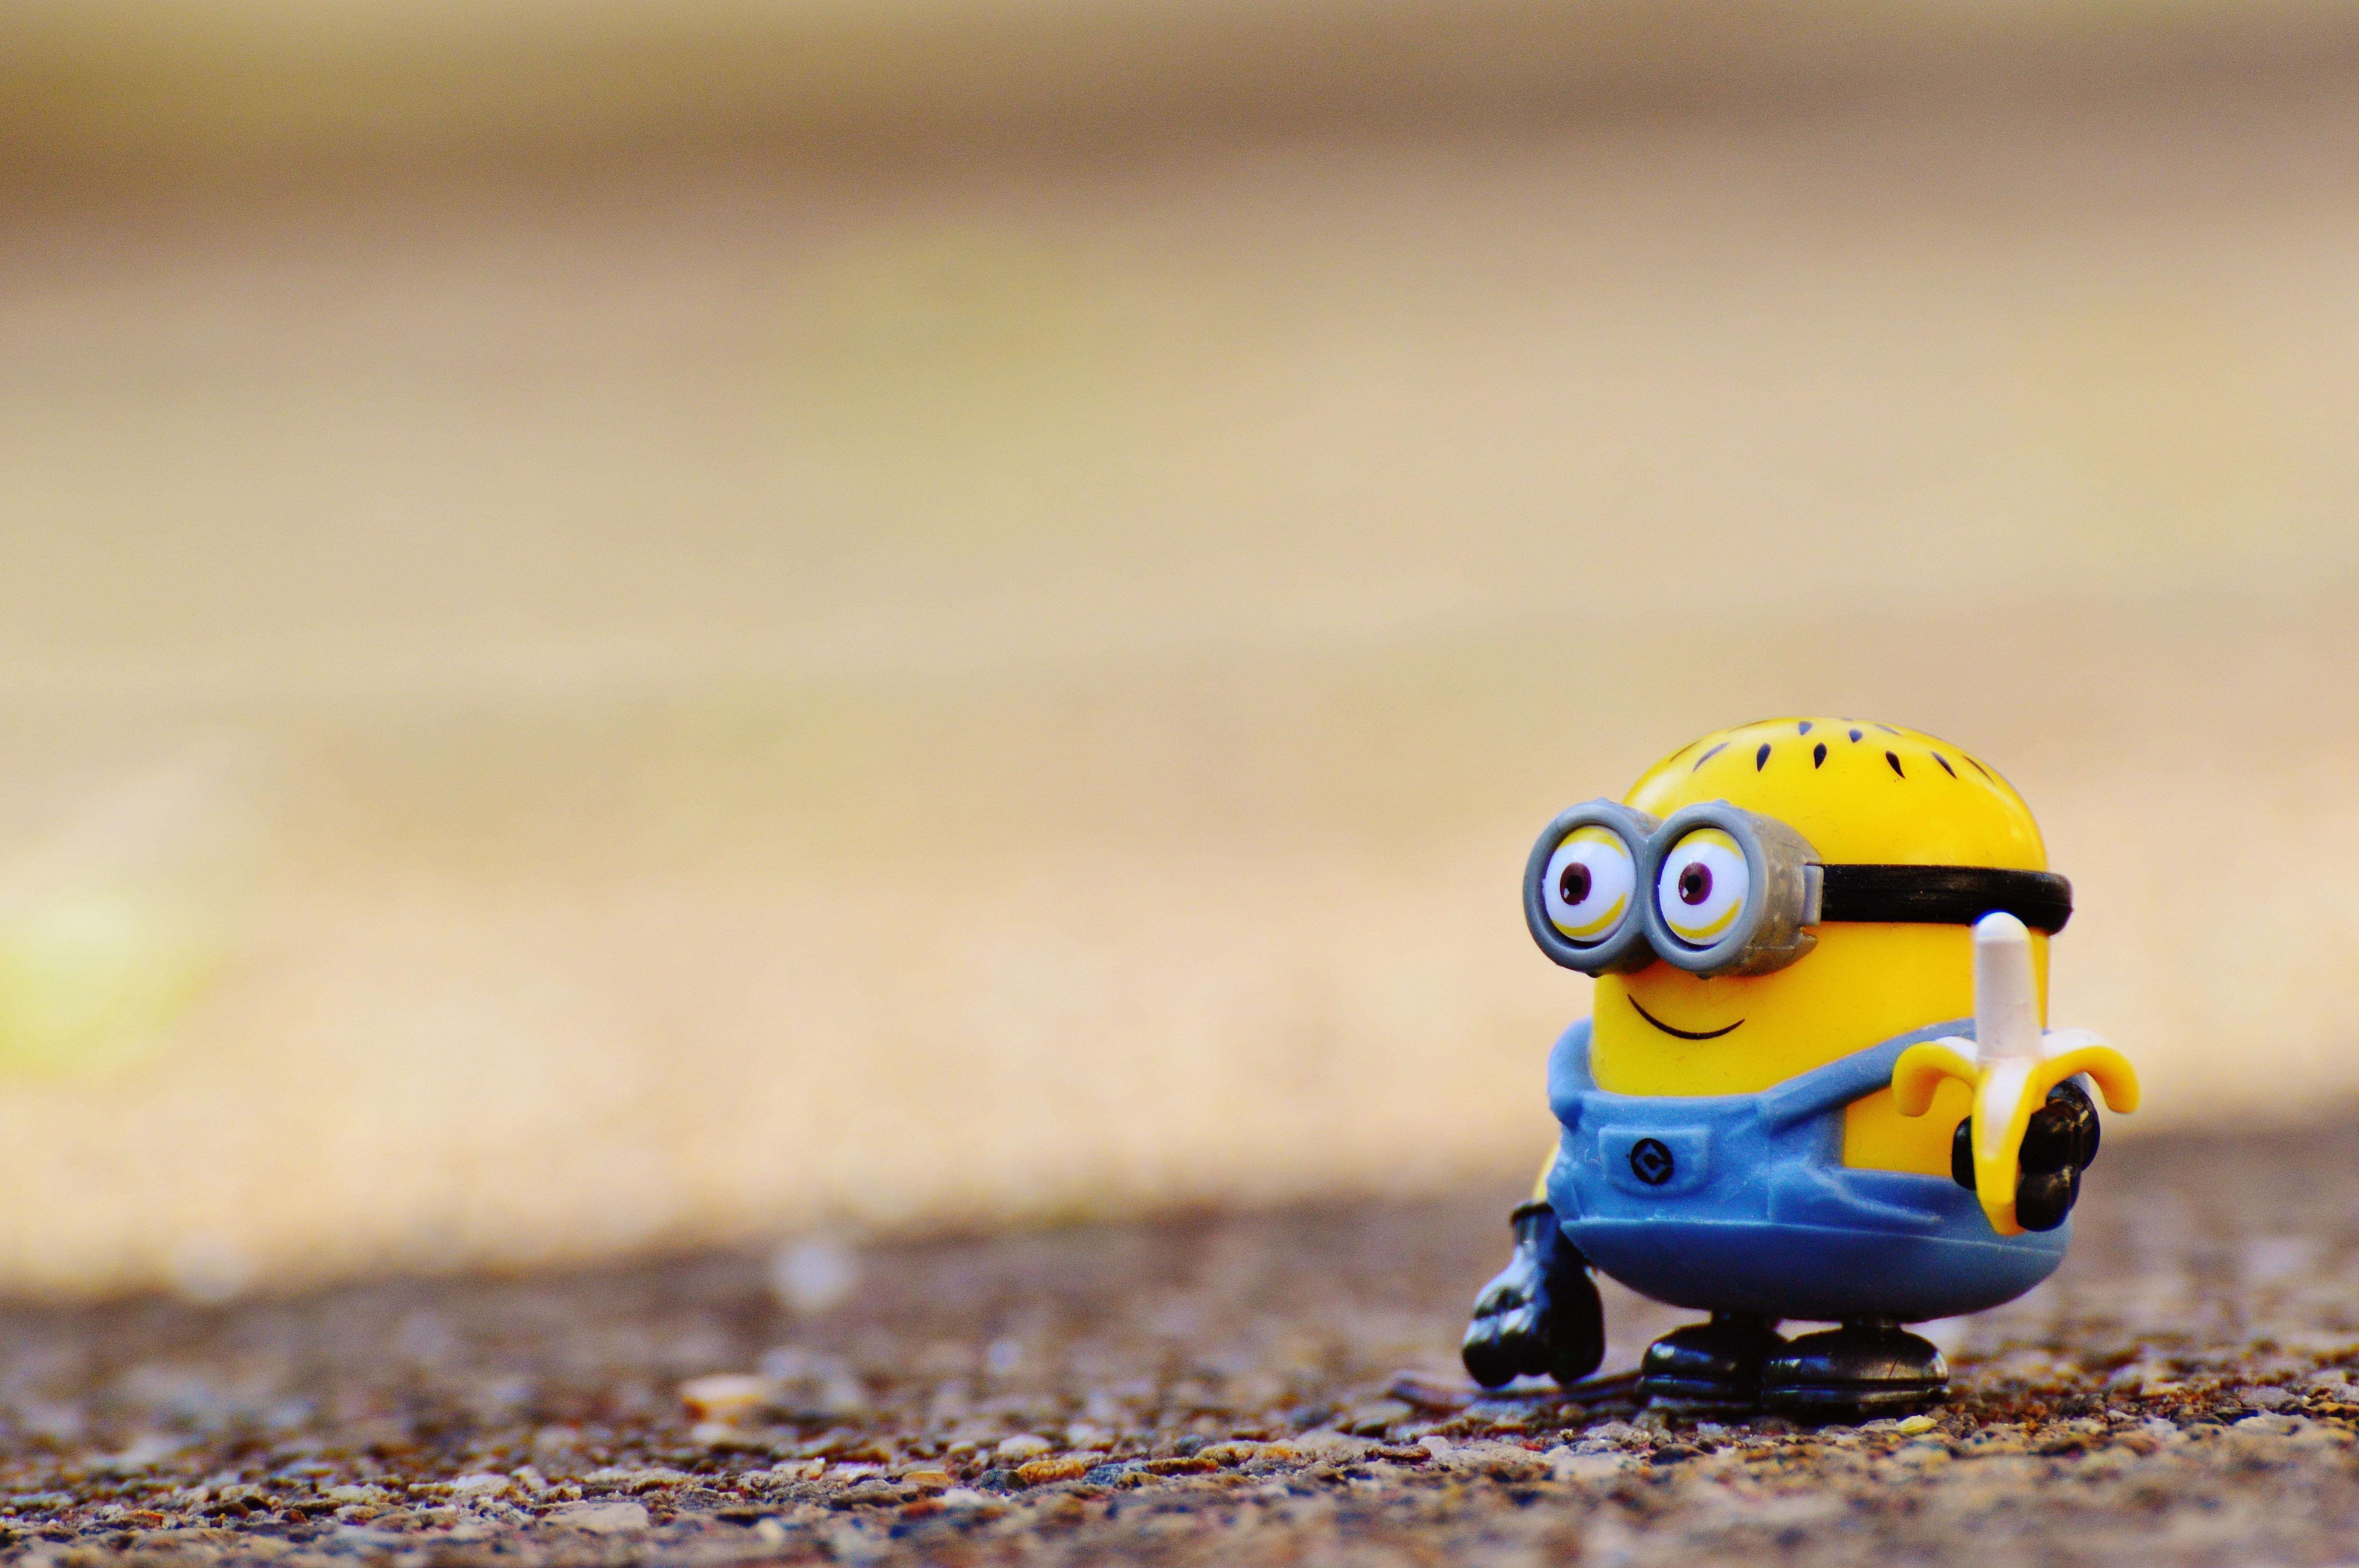 Minion, Cute, Banana, Funny, Fig, Toys, toy, yellow free image